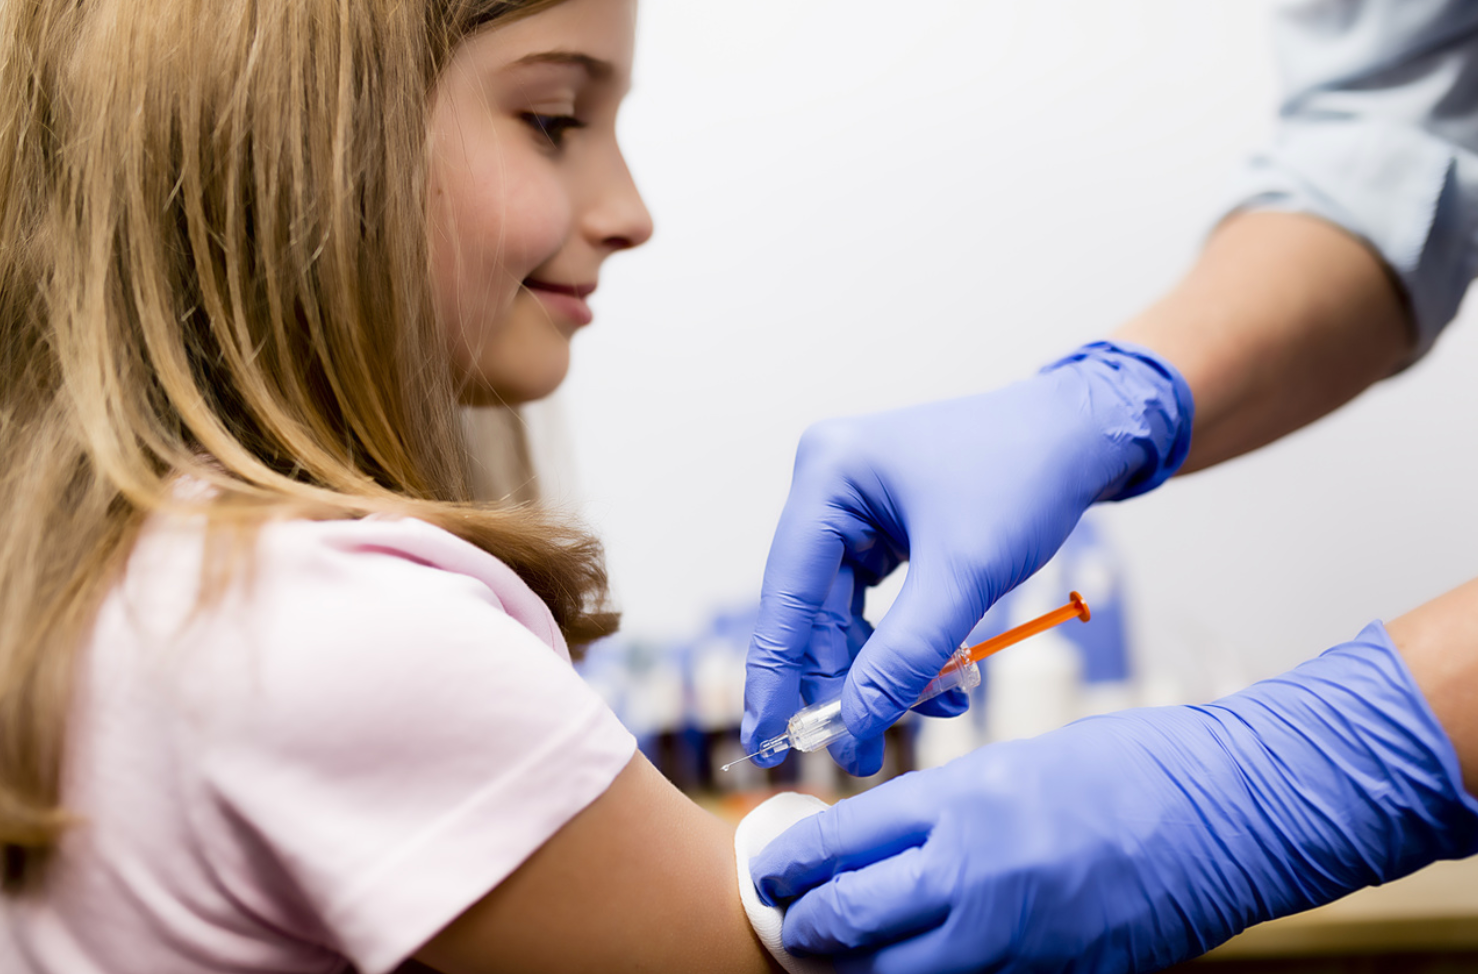 Study: Developing MIS-C Remains Rare but Significantly More Likely for Unvaccinated Children  